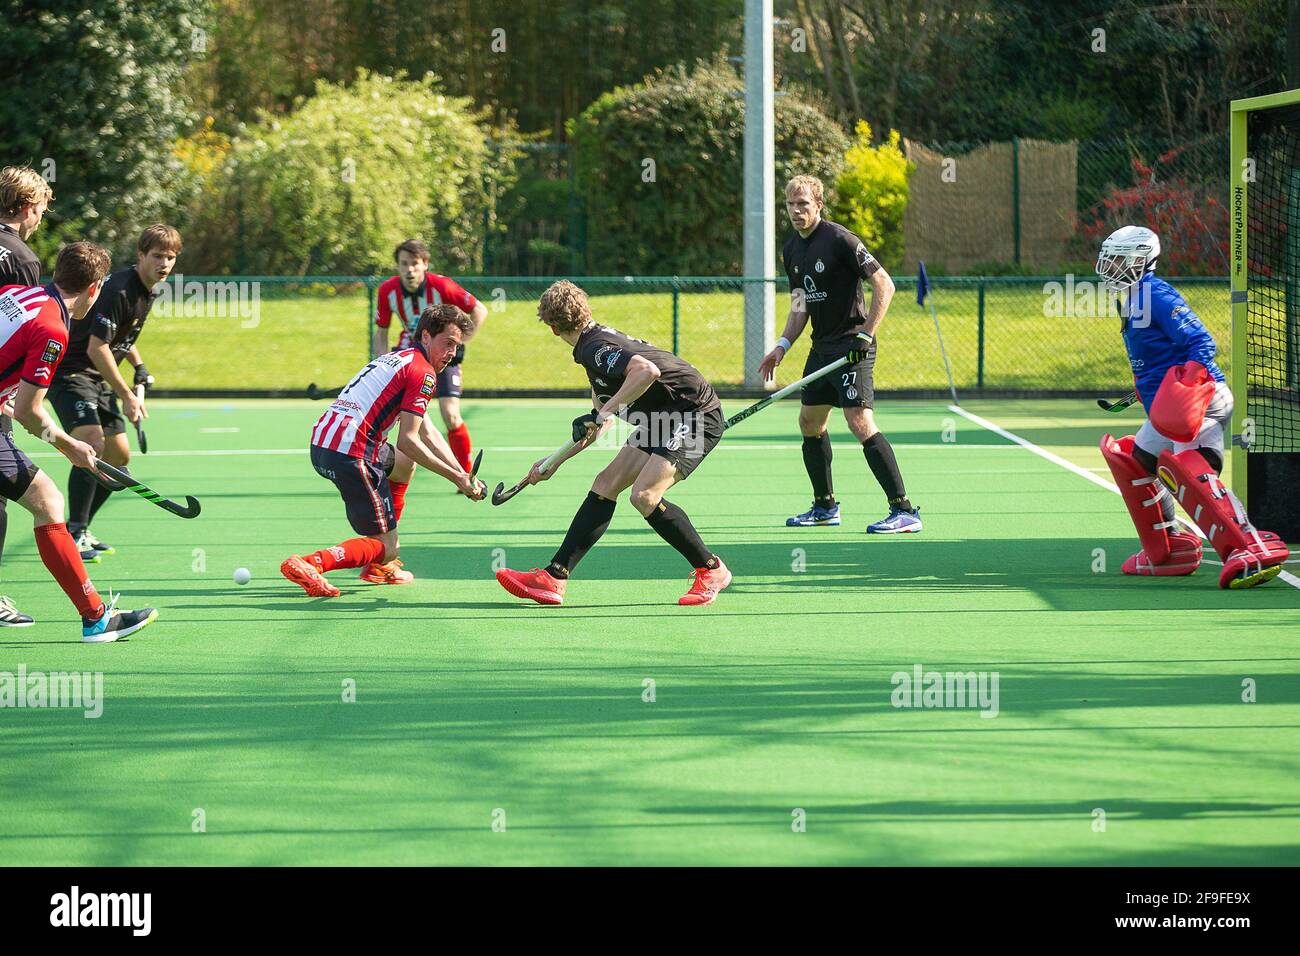 Illustration picture shows a hockey game between Royal Racing Club Brussels and Royal Leopold Club, Sunday 18 April 2021 in Brussels, in the Top 8 A g Stock Photo